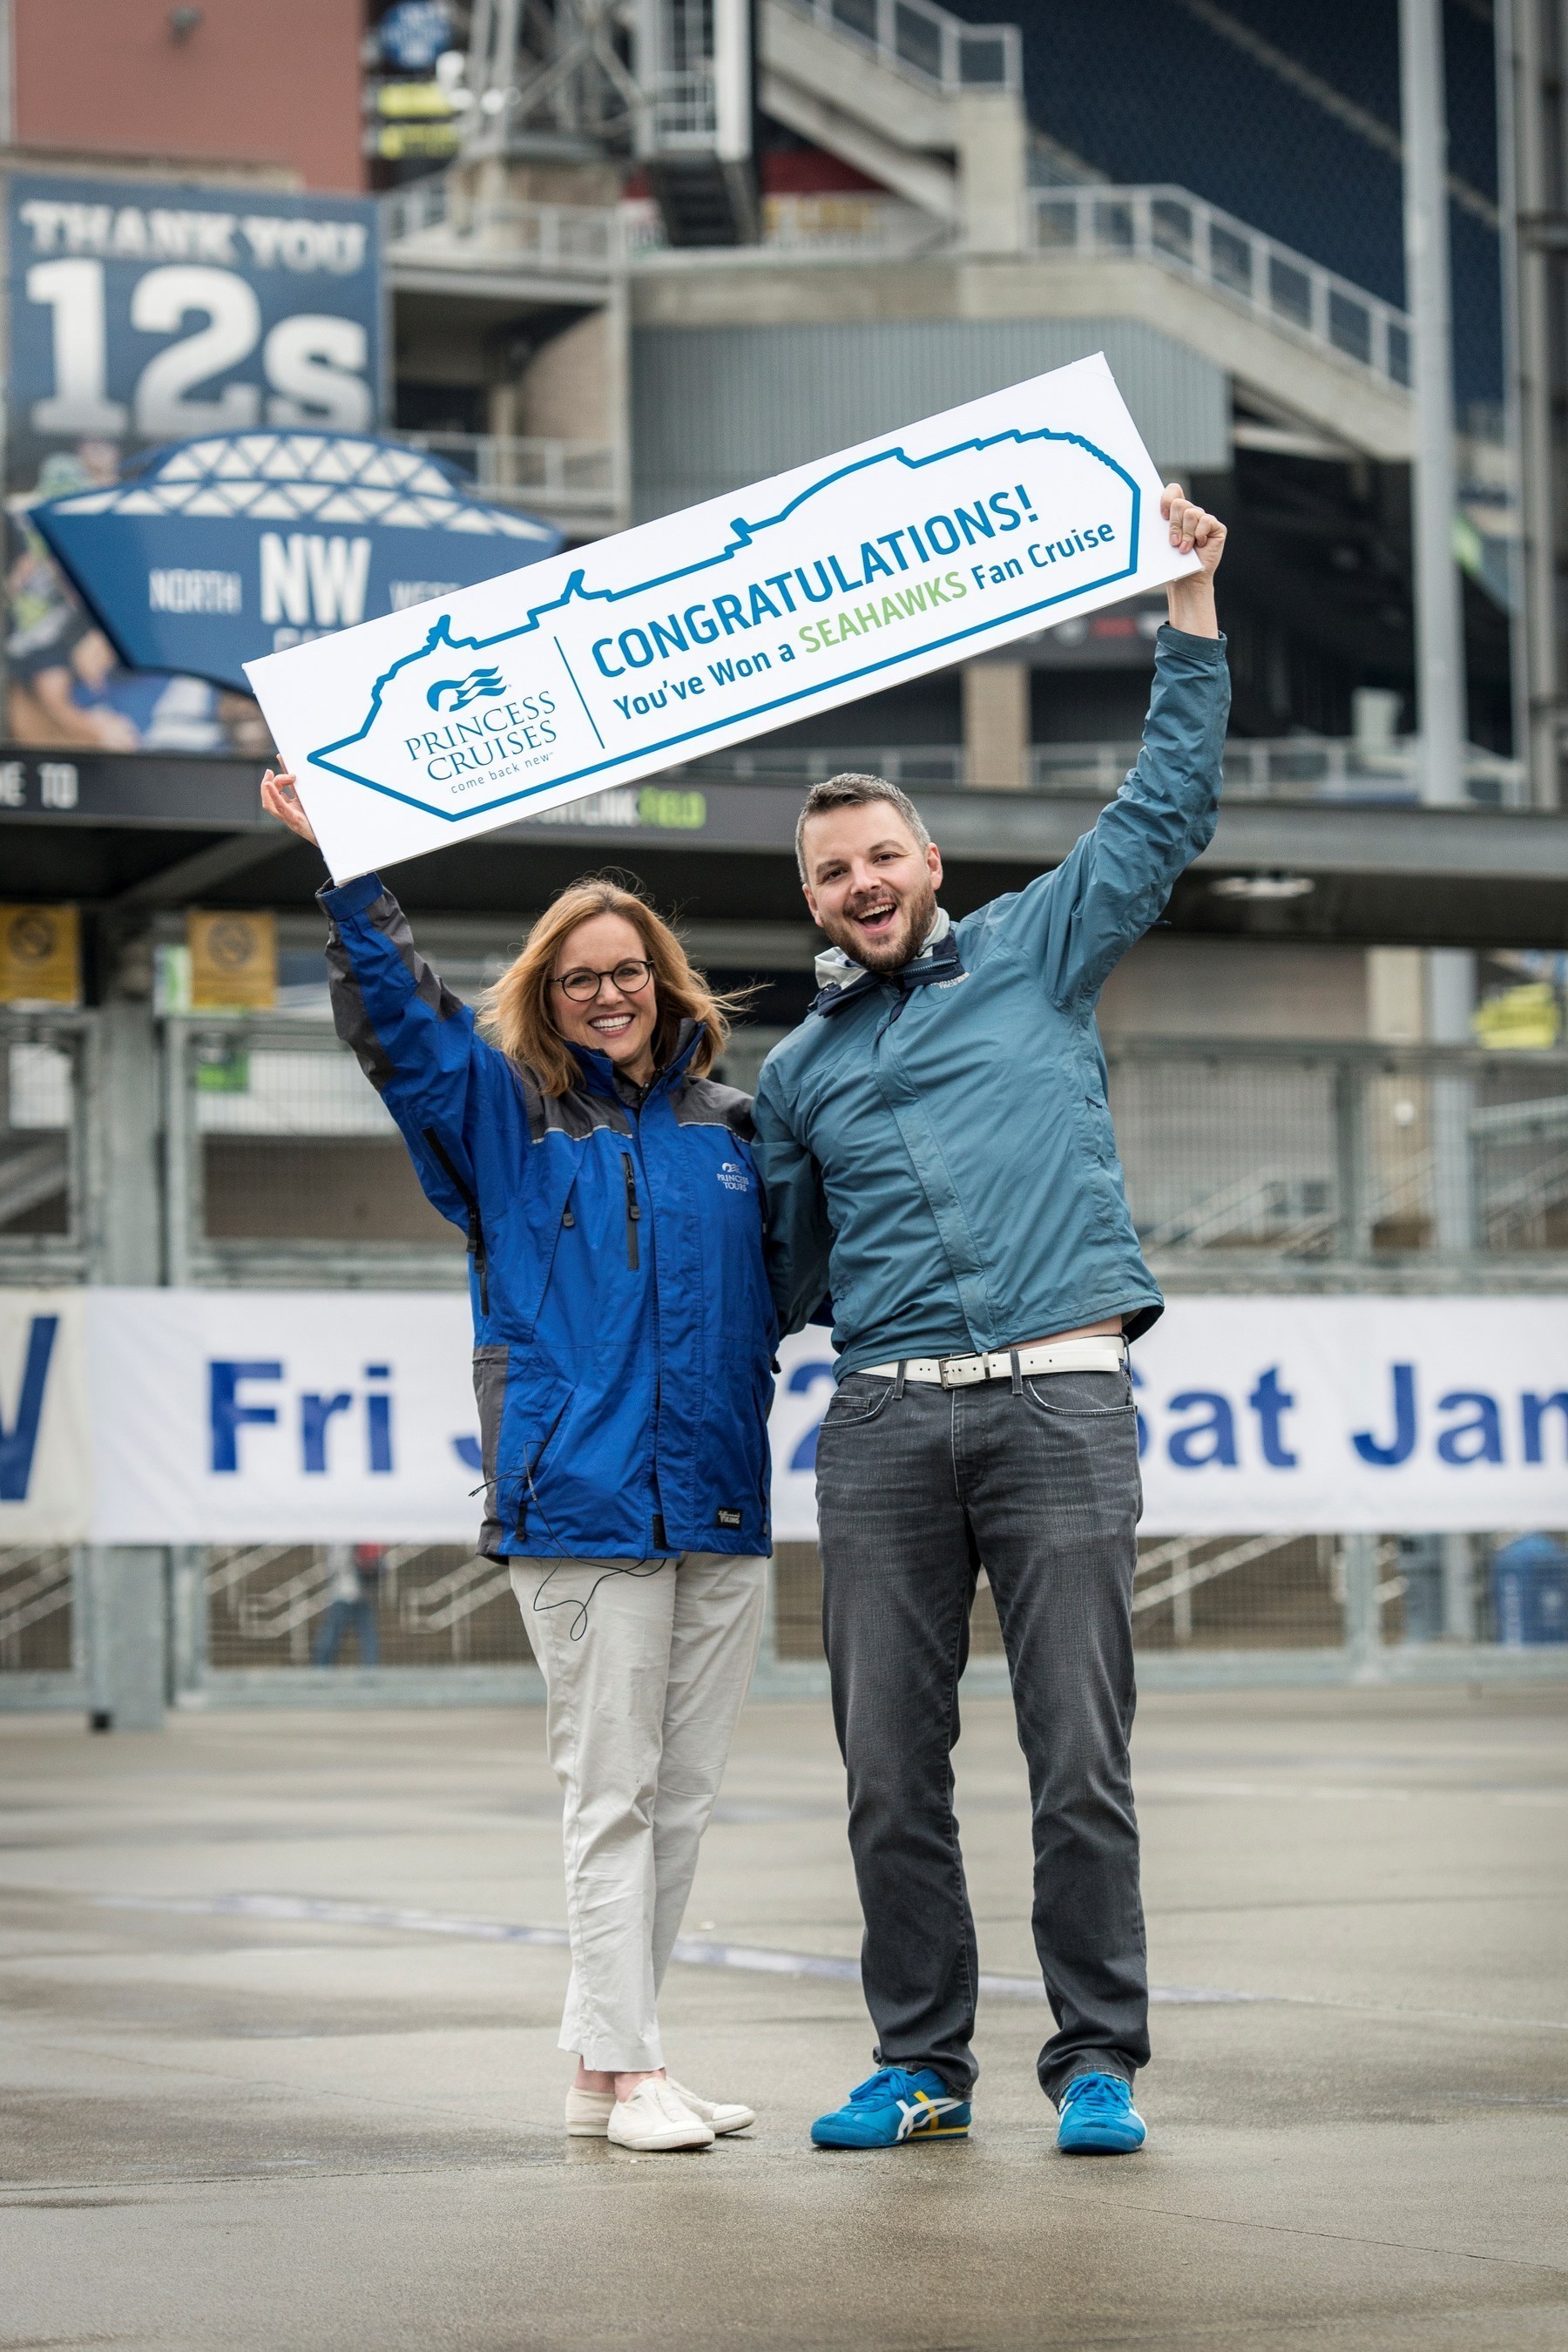 Sailing with the Seahawks - Princess Cruises Vice President Lisa Syme presents Seahawks Super fan PJ LeDorze with an invitation to join the first-ever Seattle Seahawks fan cruise departing from Seattle to Alaska over Father's Day in June.